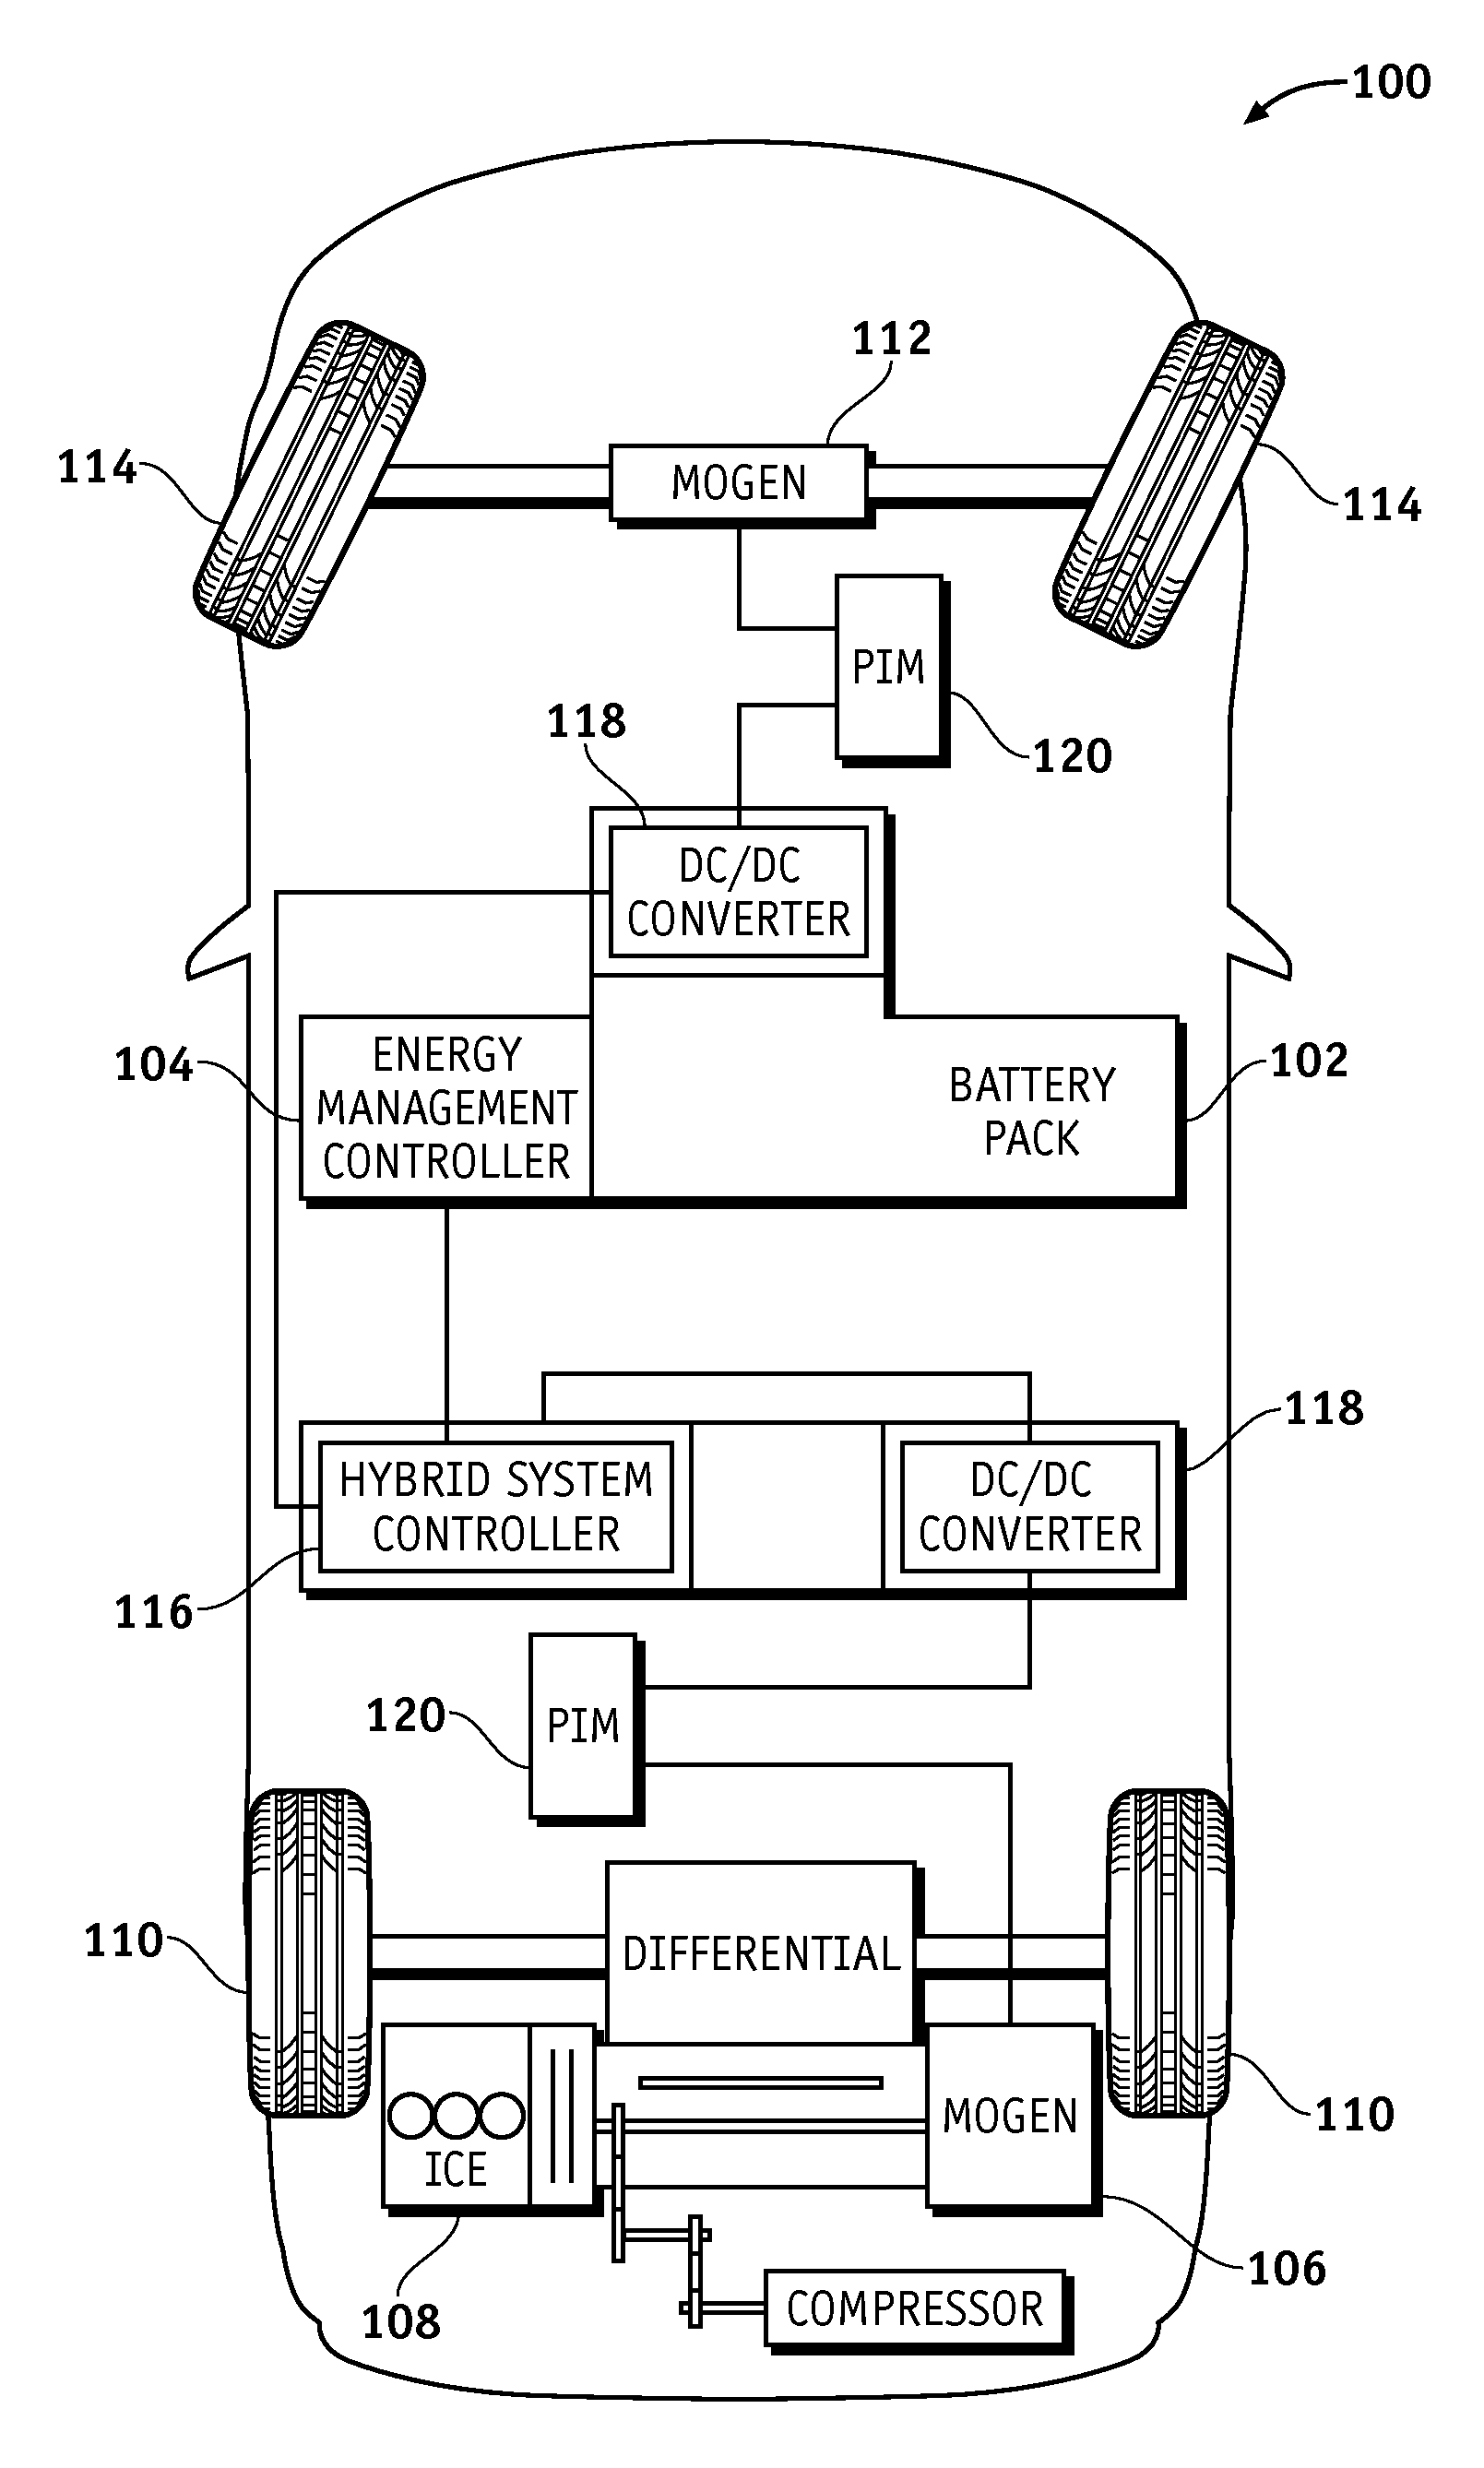 Dynamically adaptive method for determining the state of charge of a battery